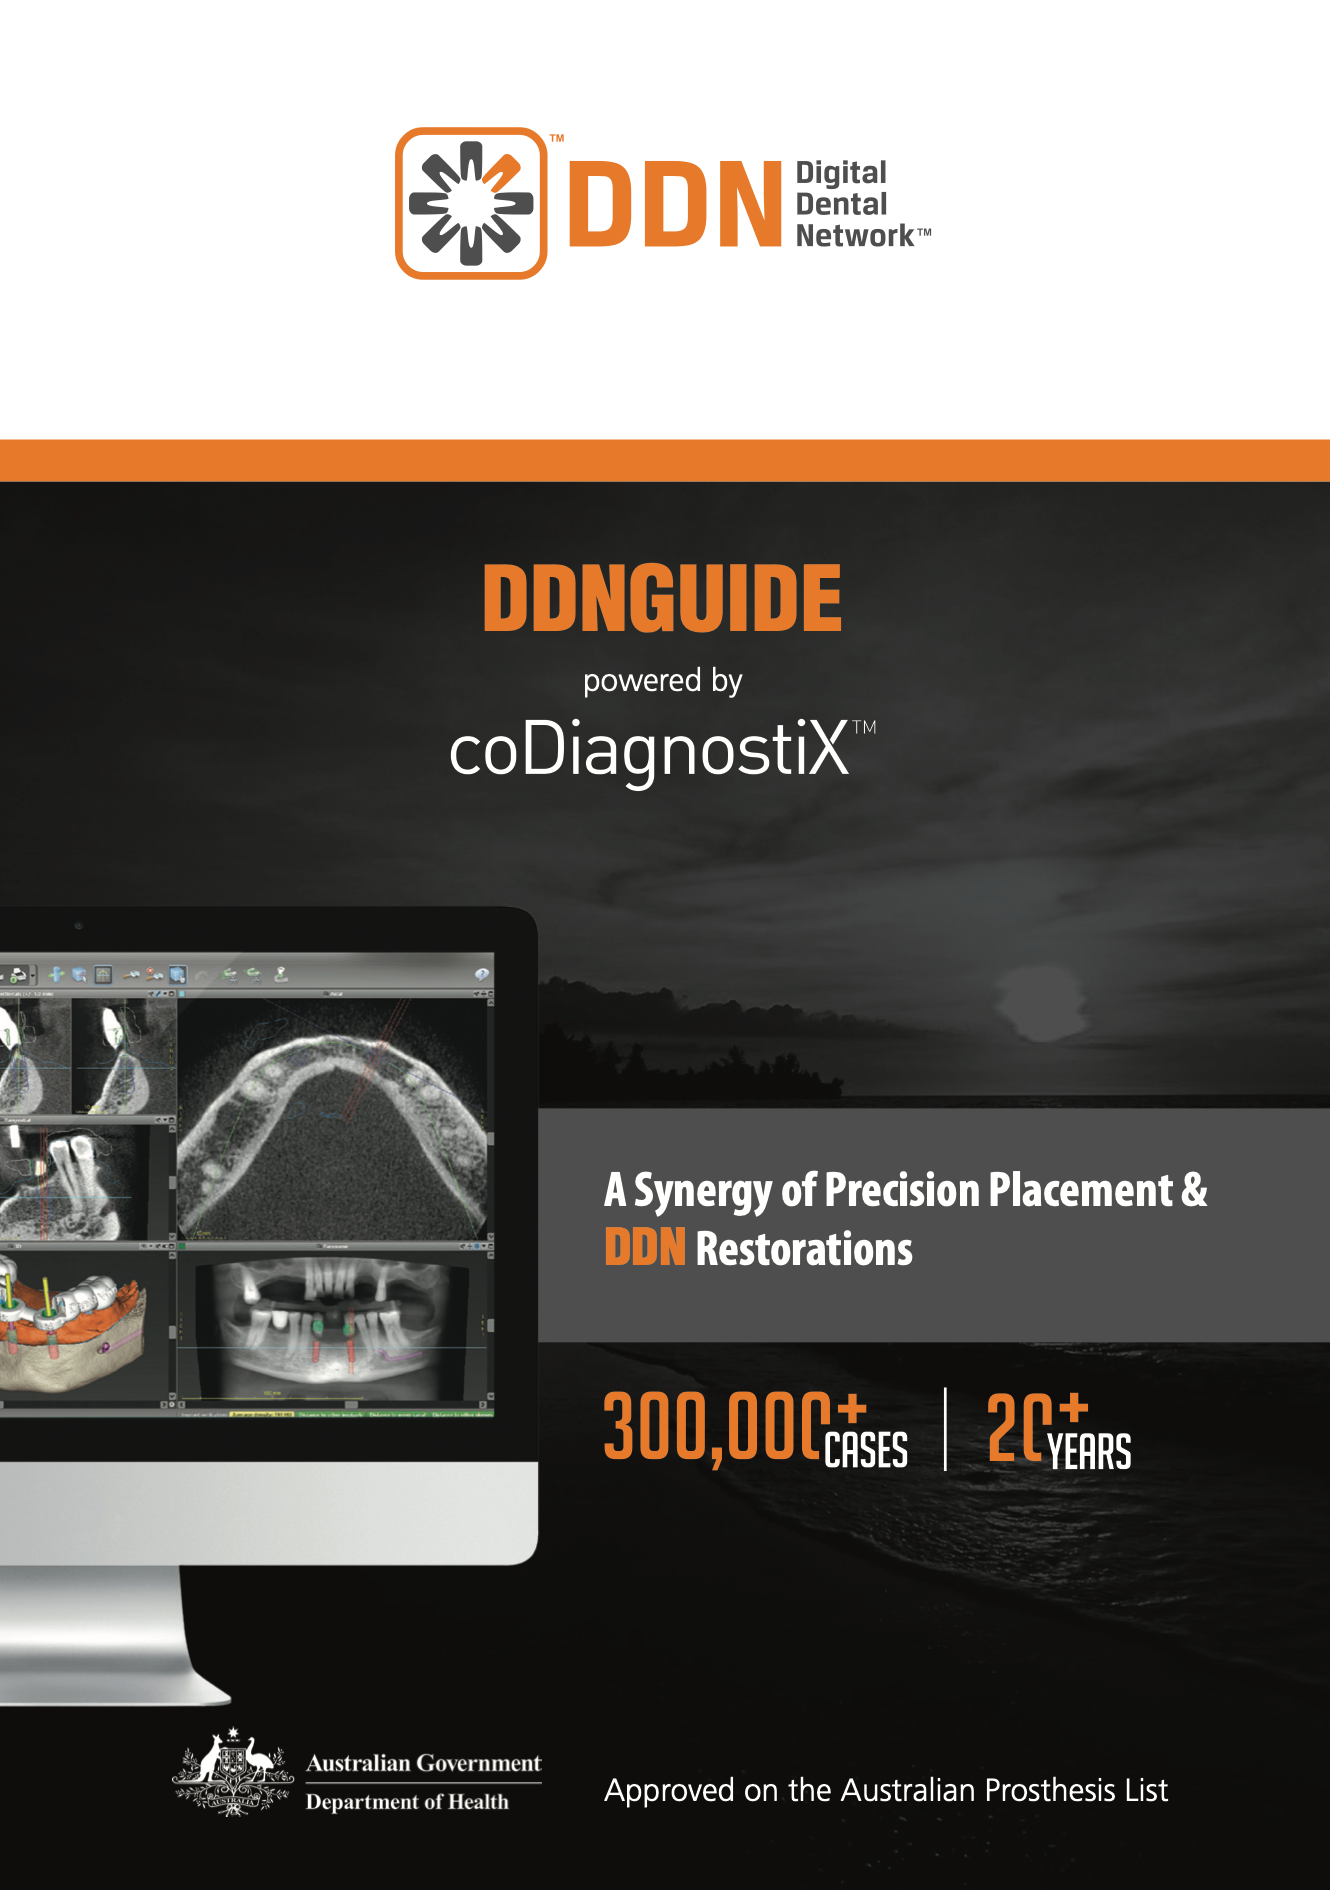 DDNGUIDE: Product Brochure